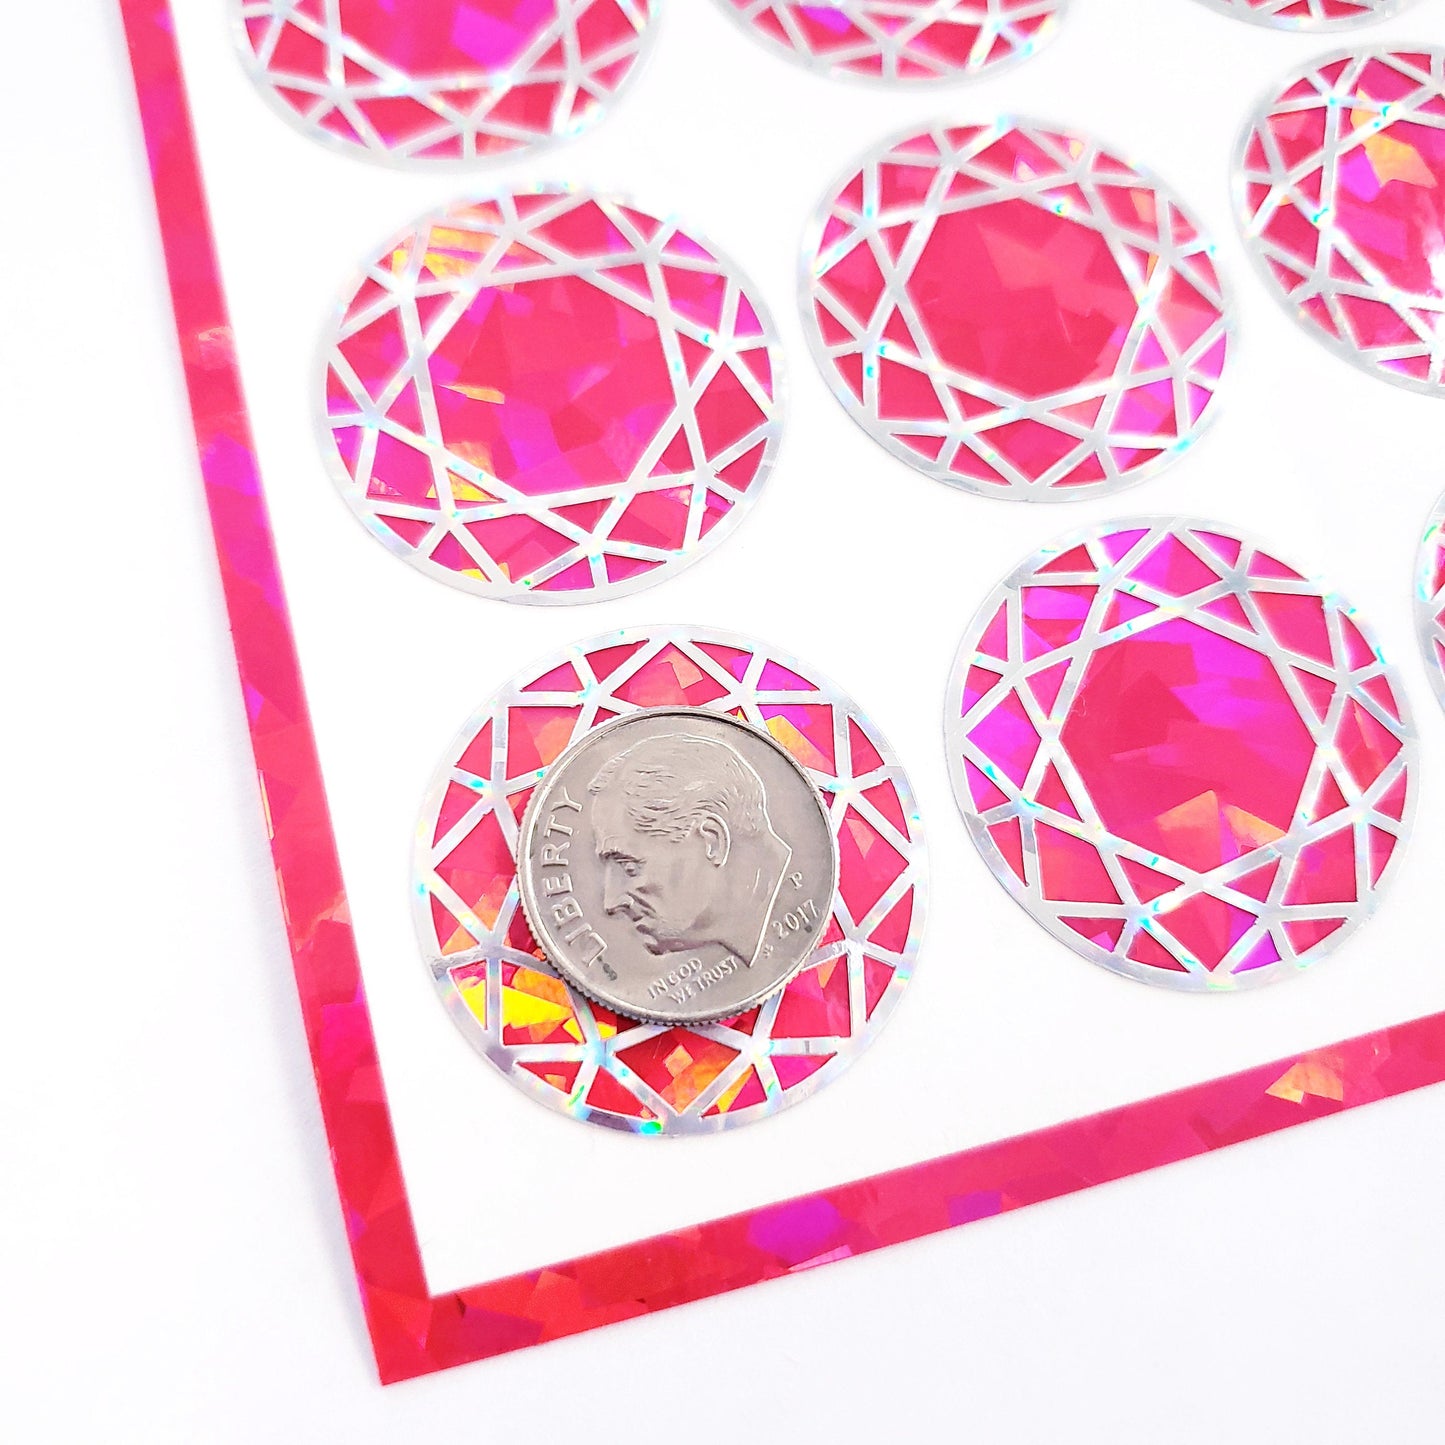 Bright Pink Diamond Stickers, set of 20 small sparkly round pink jewel decals for Libra birthday gift.